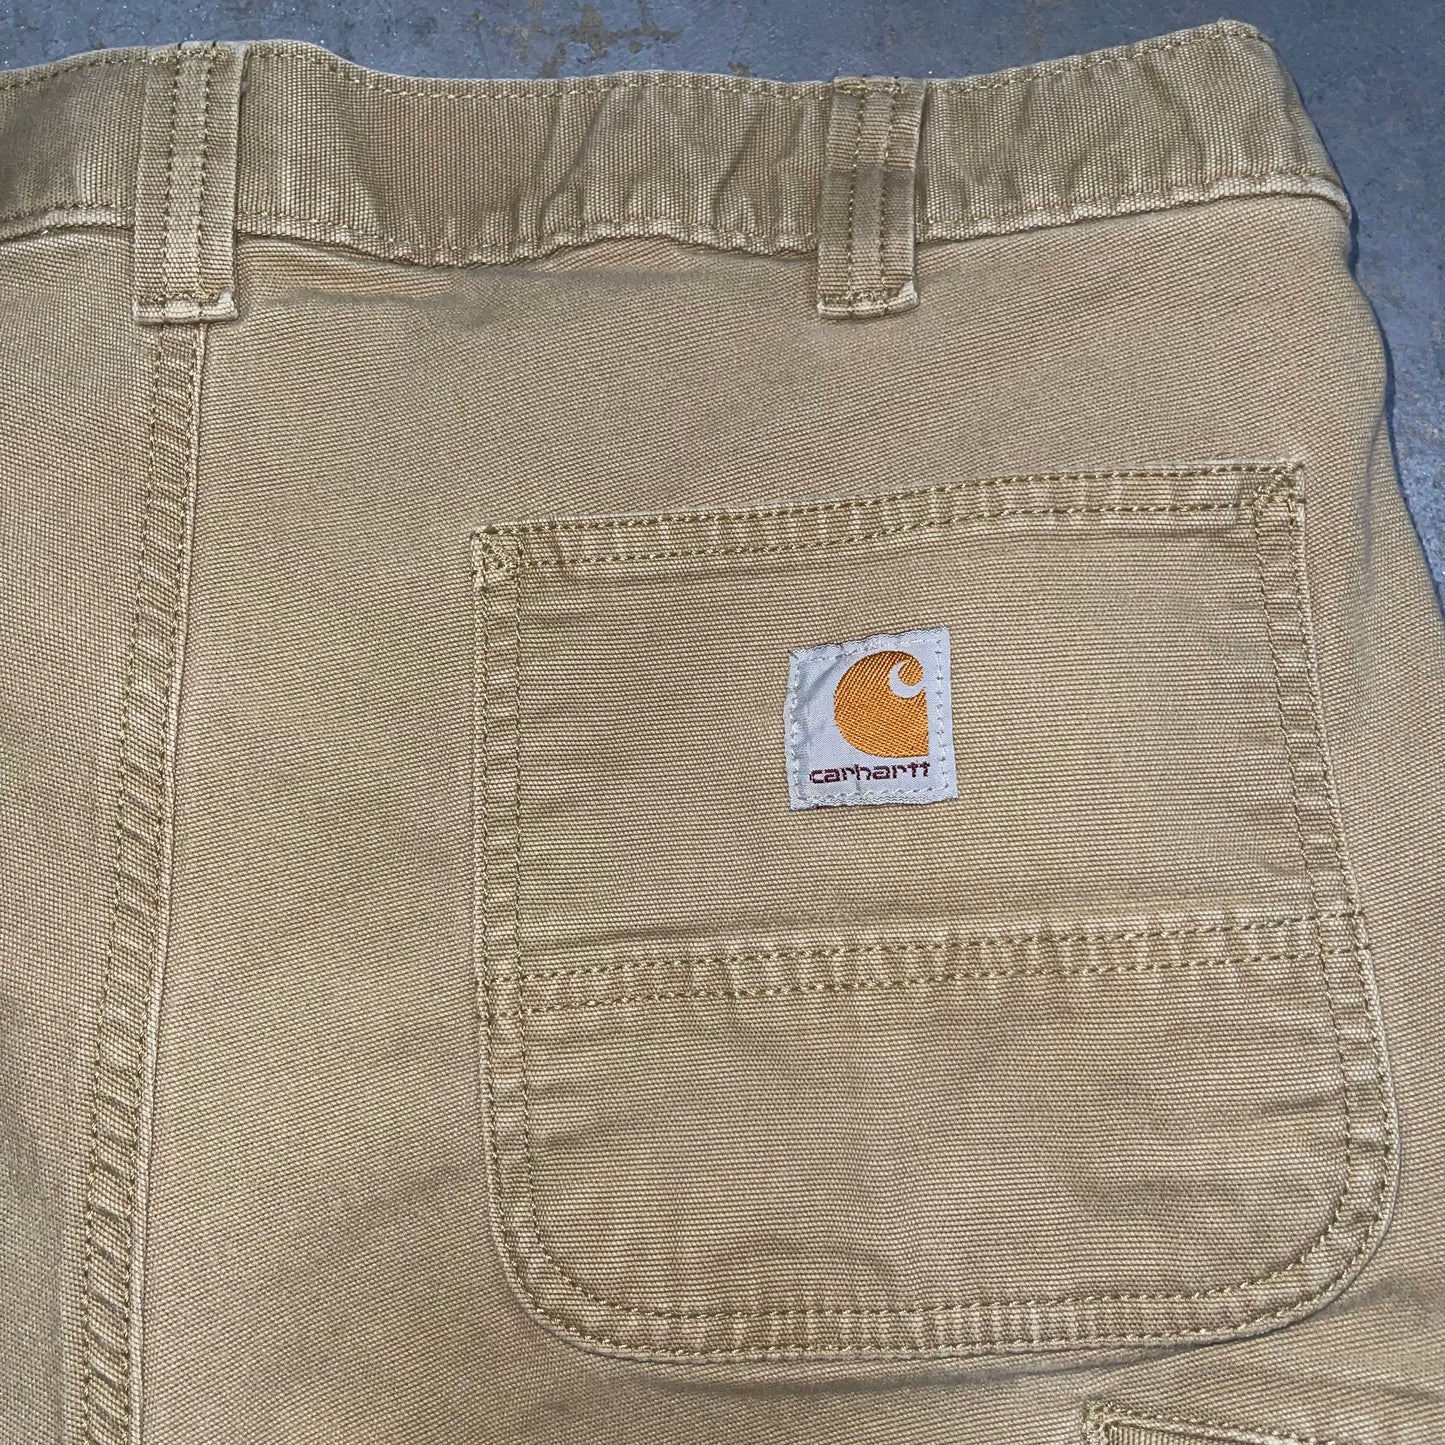 Carhartt Relaxed Fit Carpenters Pants. 36x30